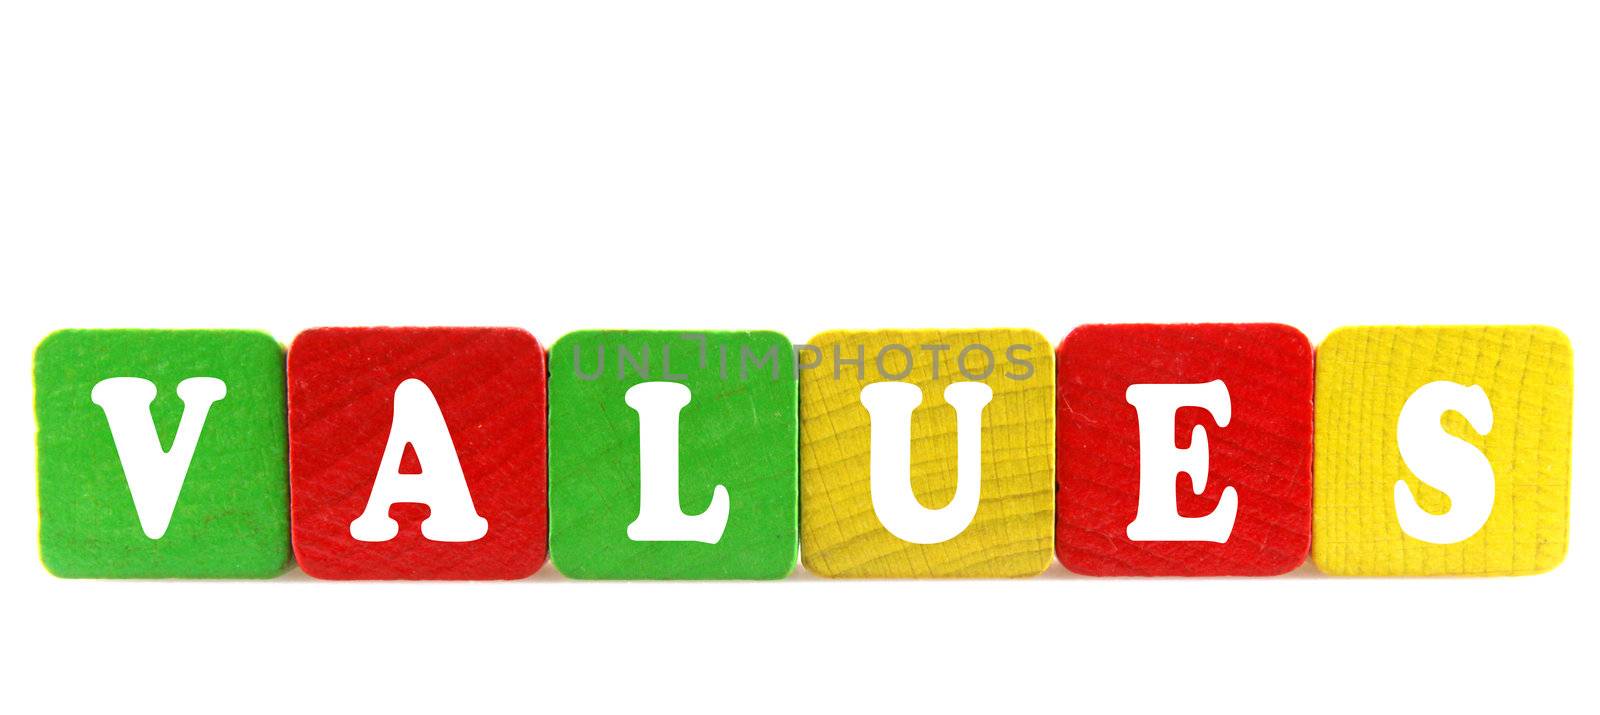 values - isolated text in wooden building blocks